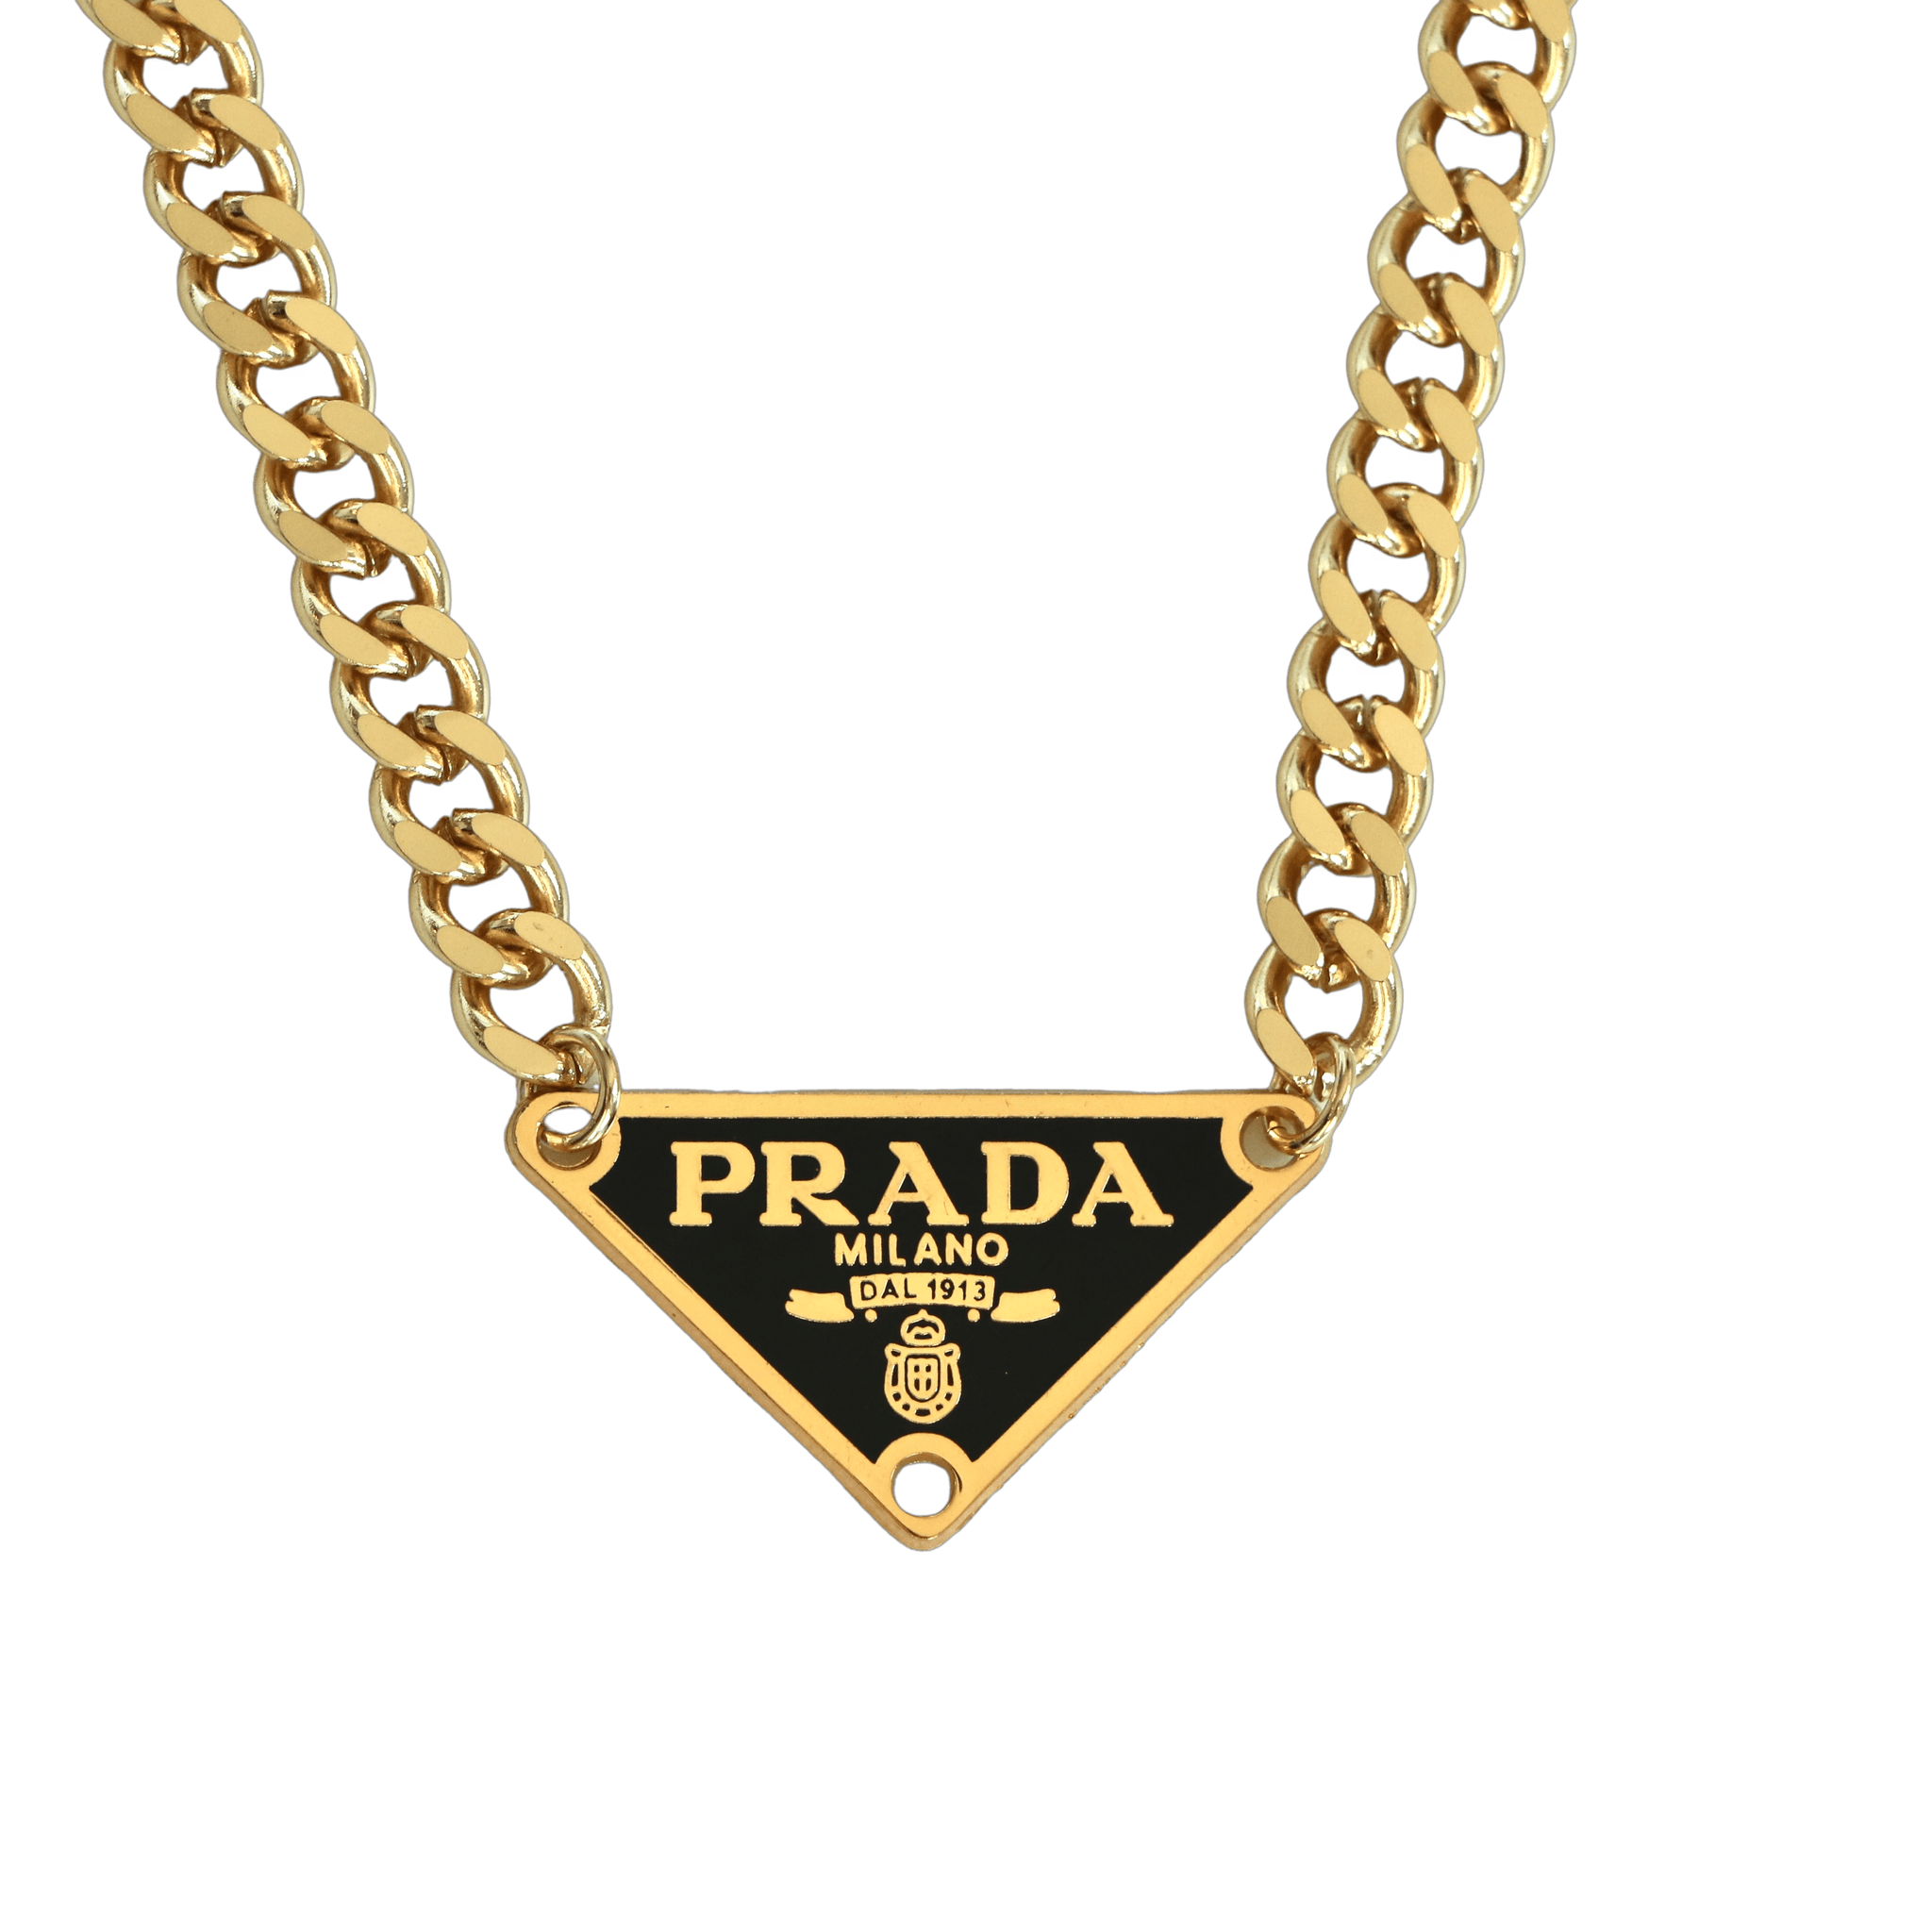 Prada Eternal Gold necklace in pink gold with nano triangle pendant 1850.00